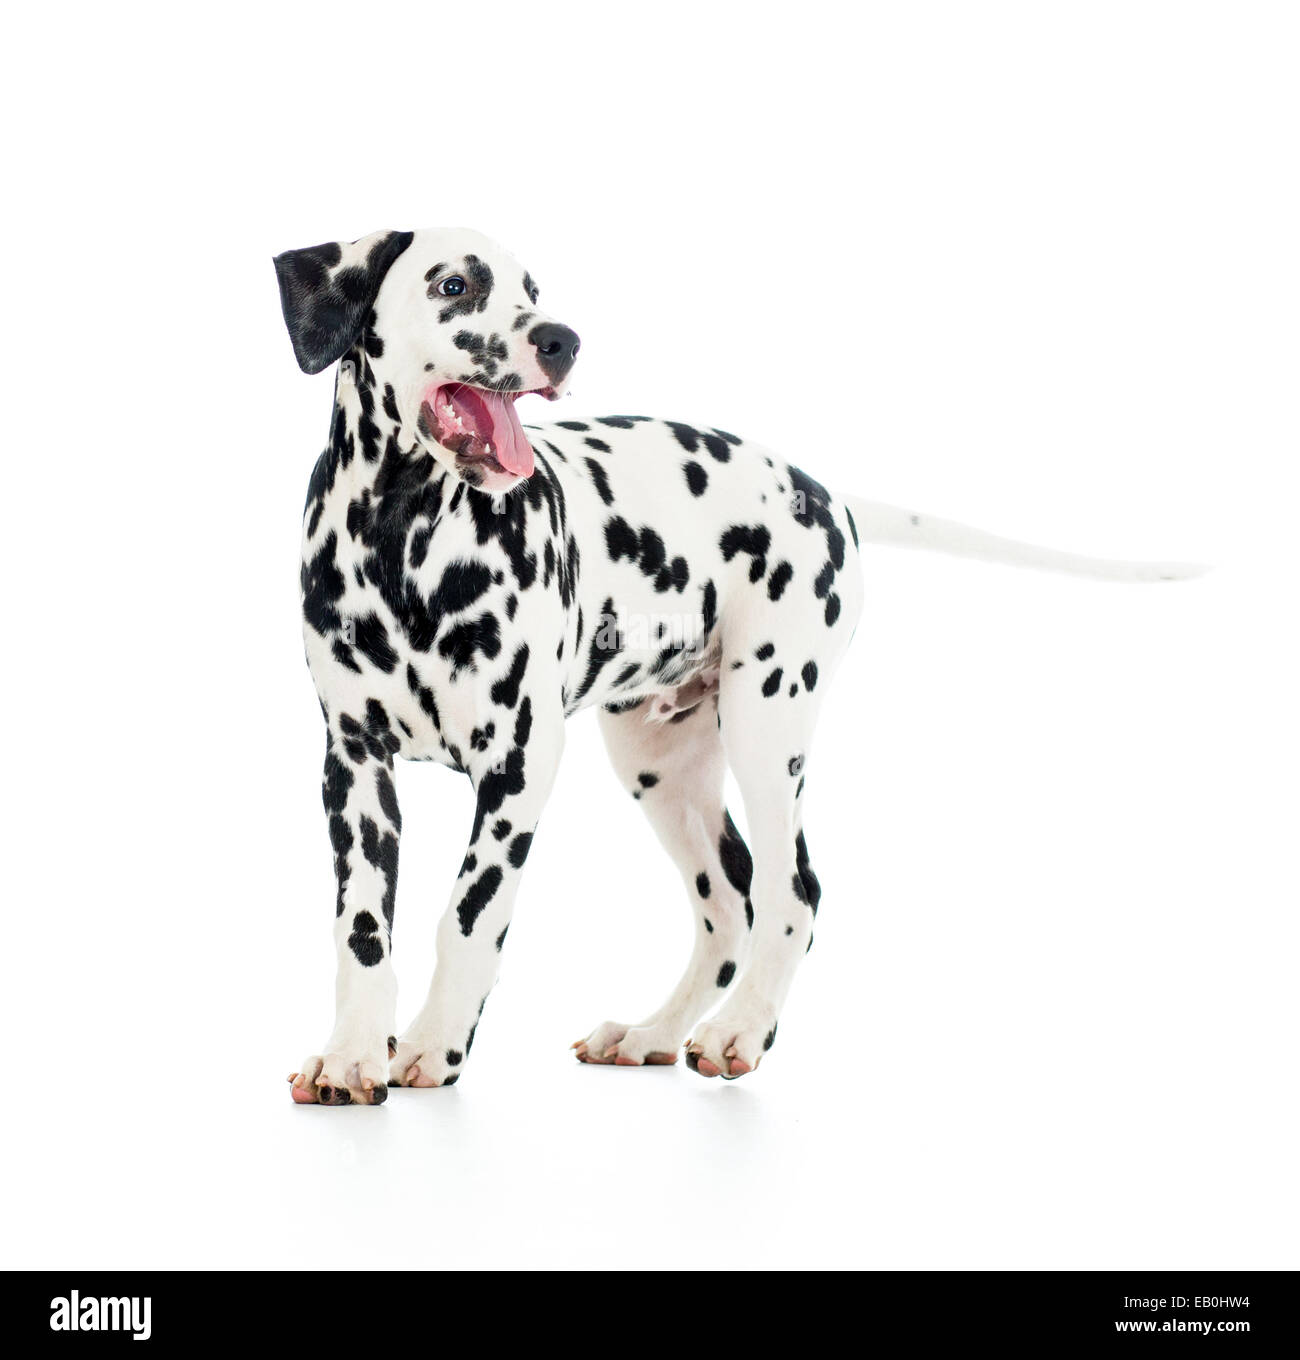 Chien dalmatien, isolated on white Banque D'Images